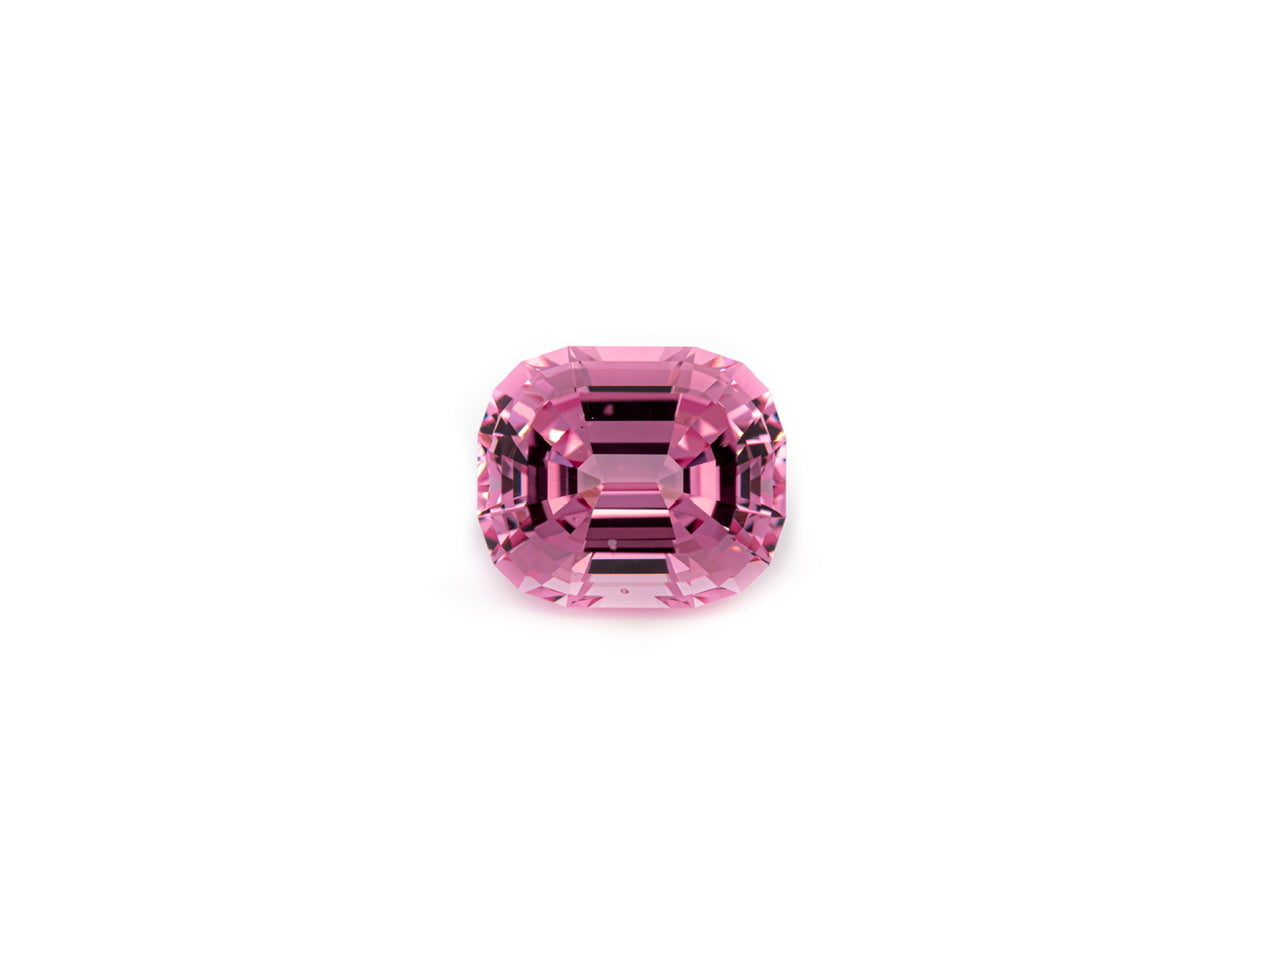 Baby pink spinel 6.03 ct